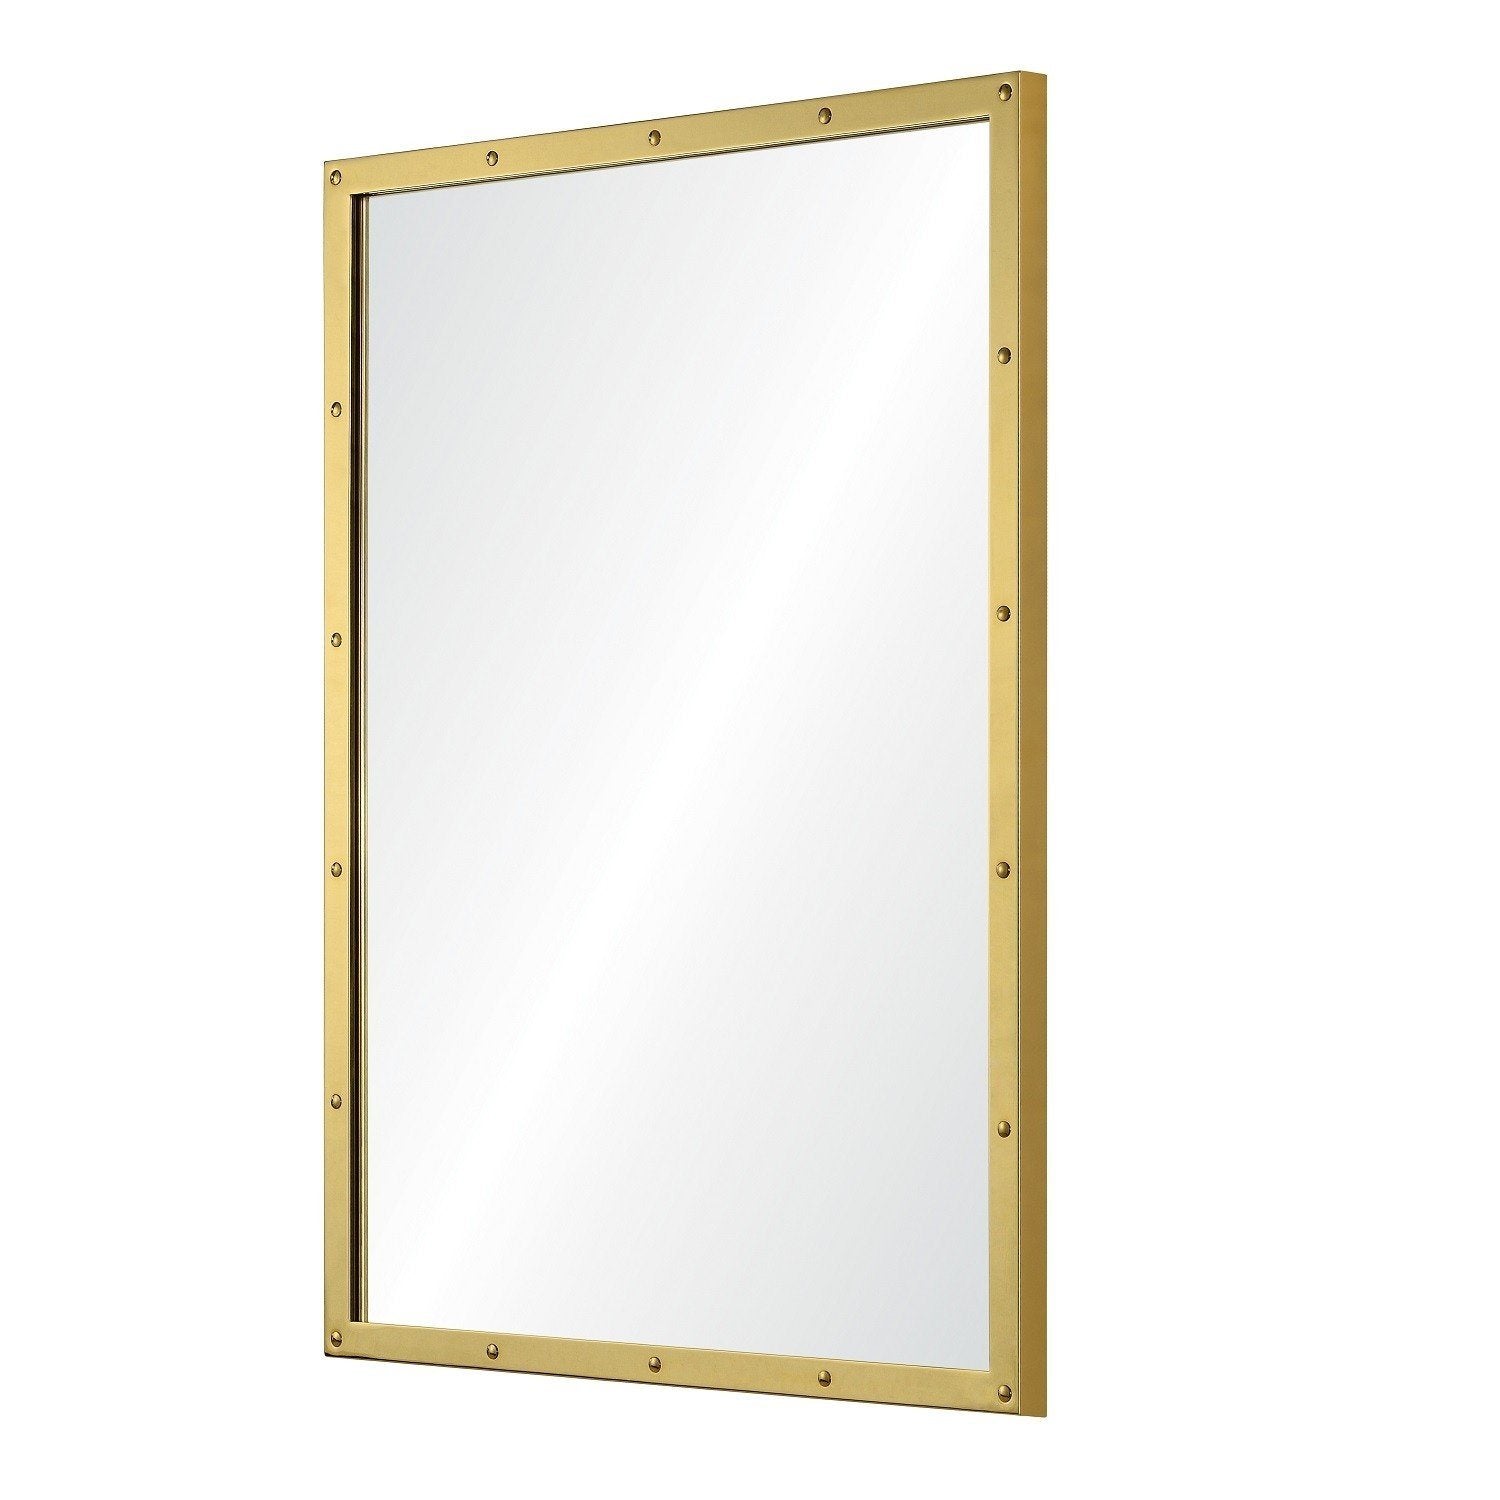 Fig Linens - Mirror Home - Burnished Brass Wall Mirror by Suzanne Kasler - Side